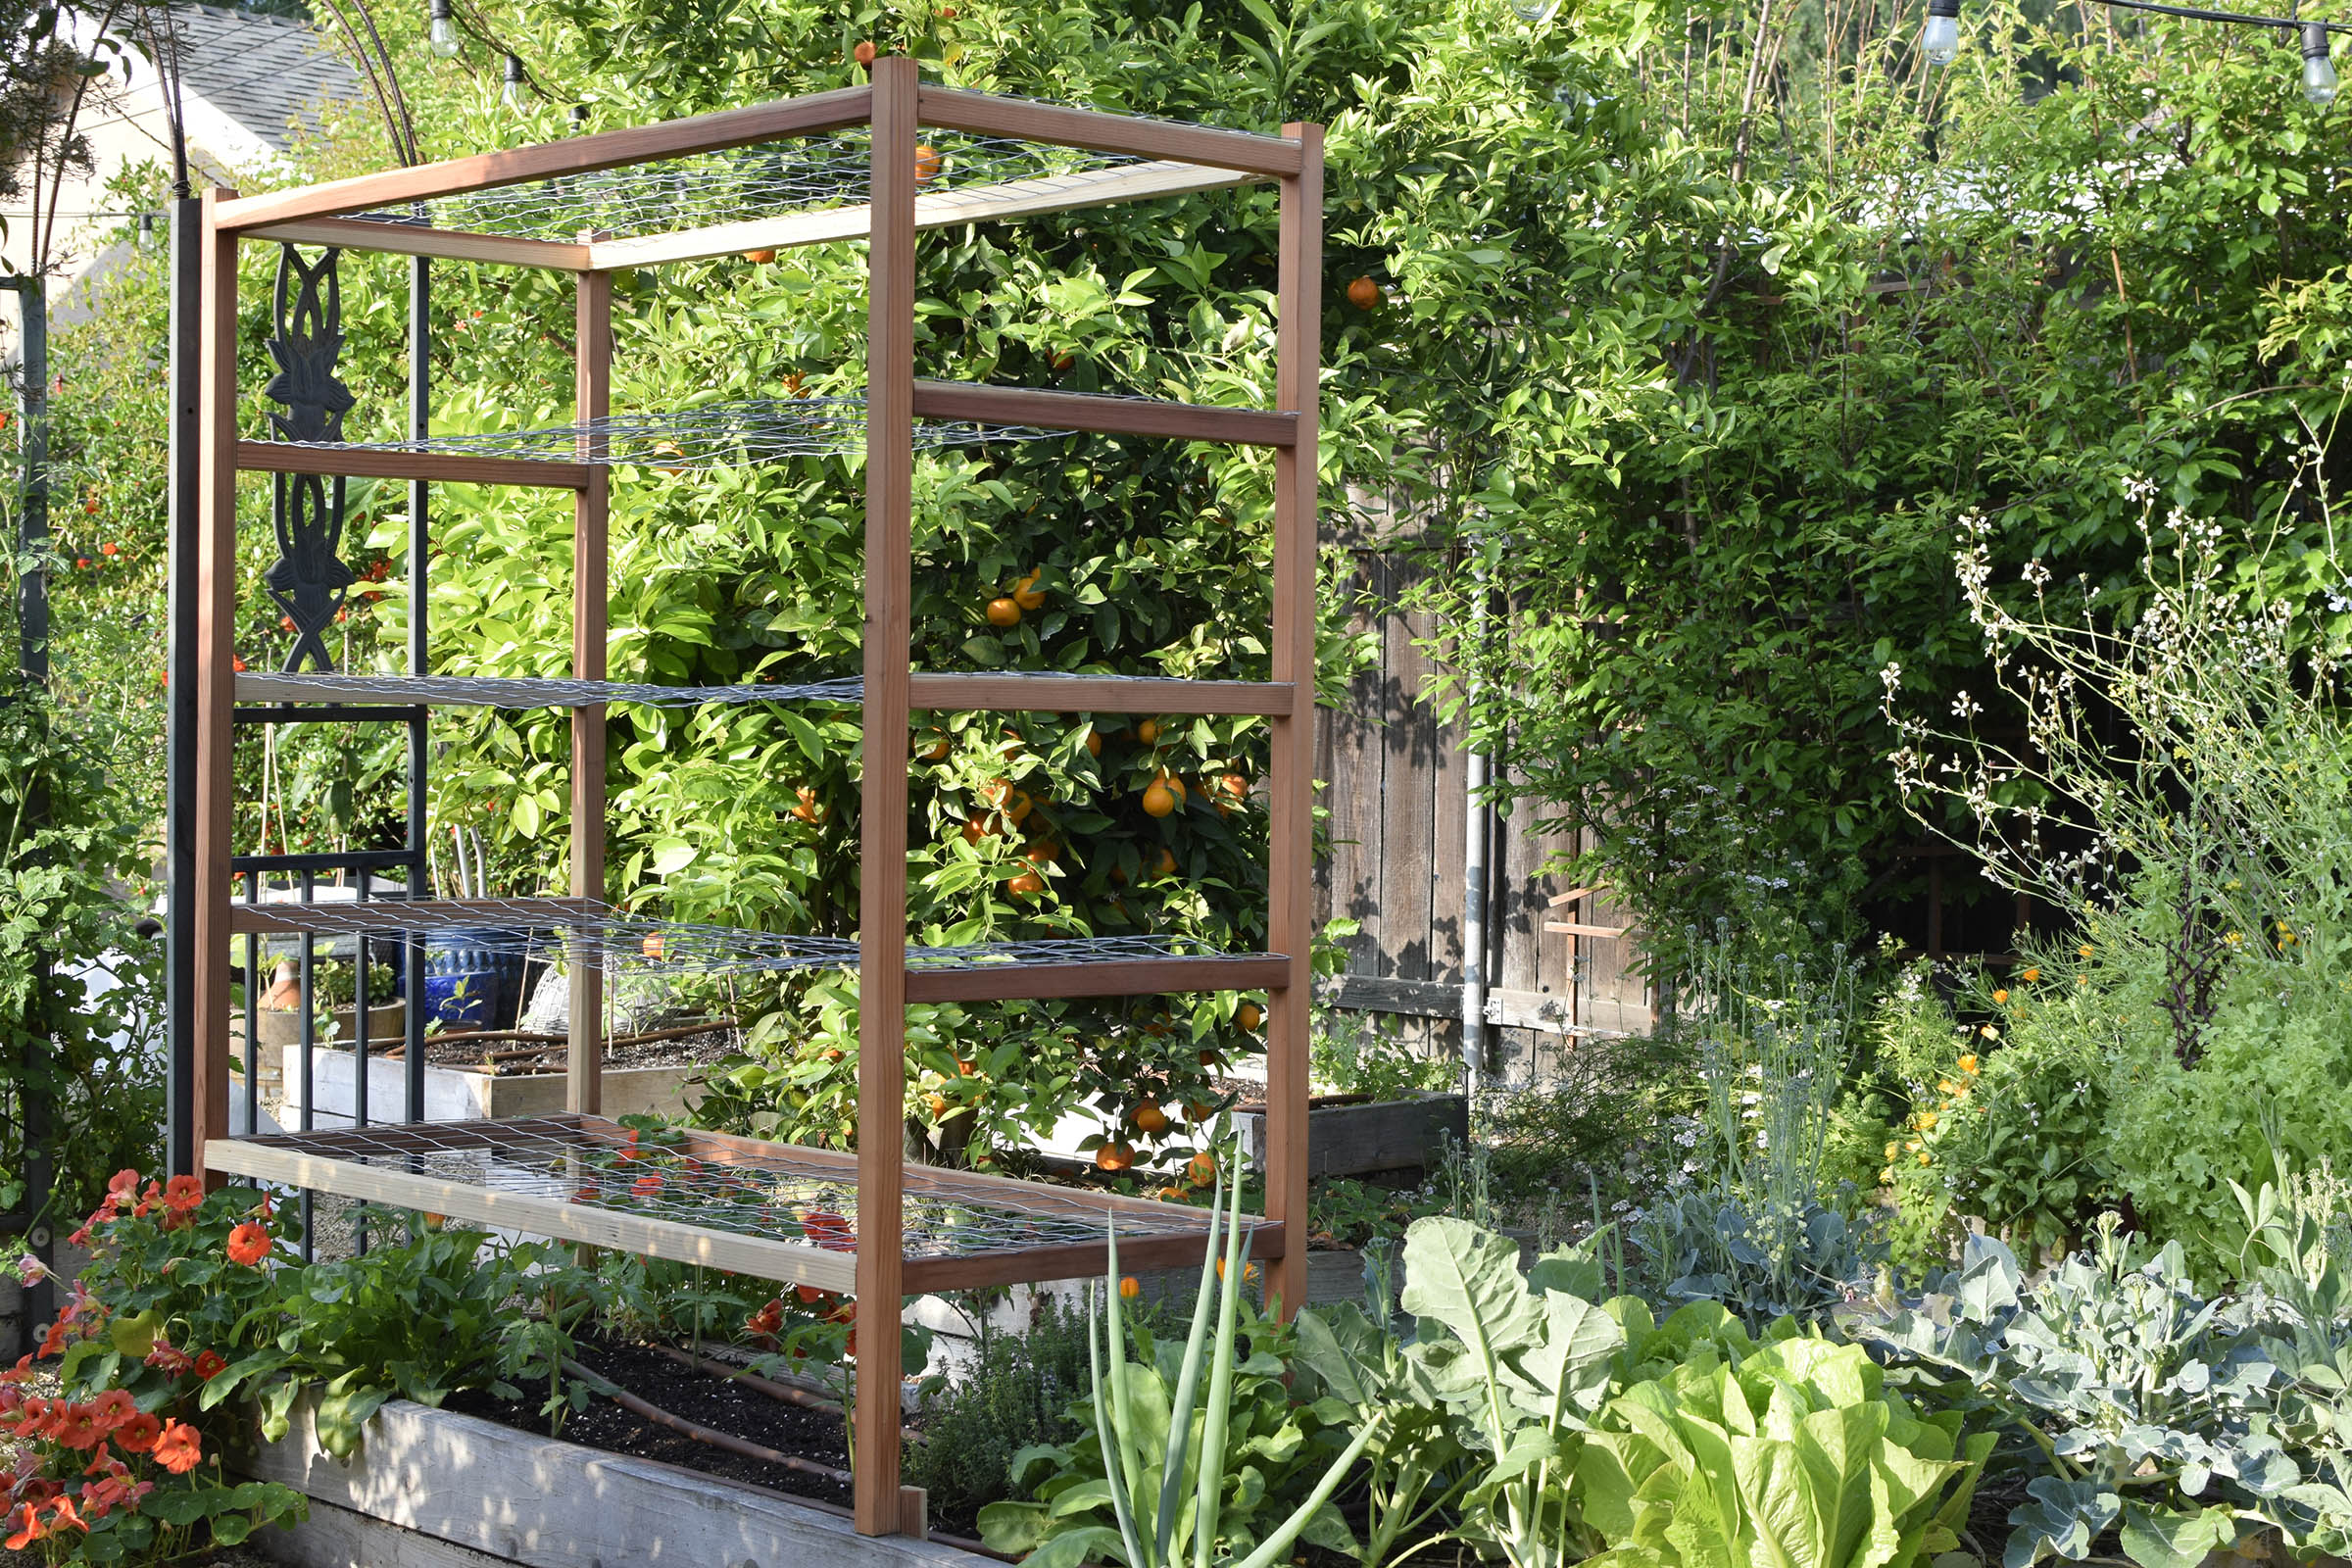 How to Plan Your Vegetable Garden Using Wire Mesh